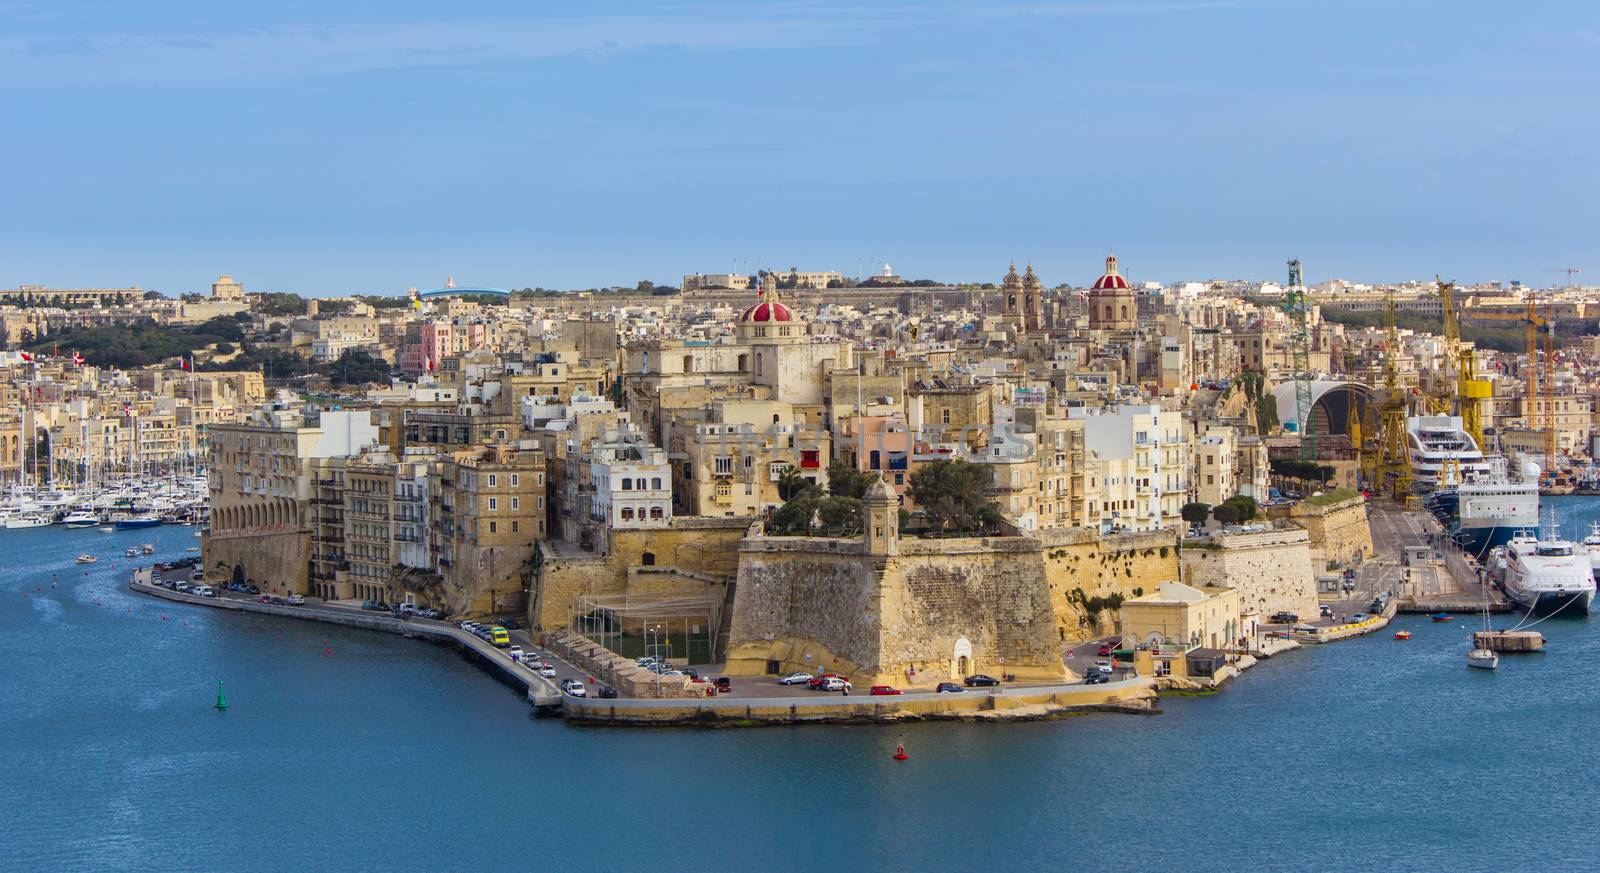 Malta Fort St. Angelo by goghy73